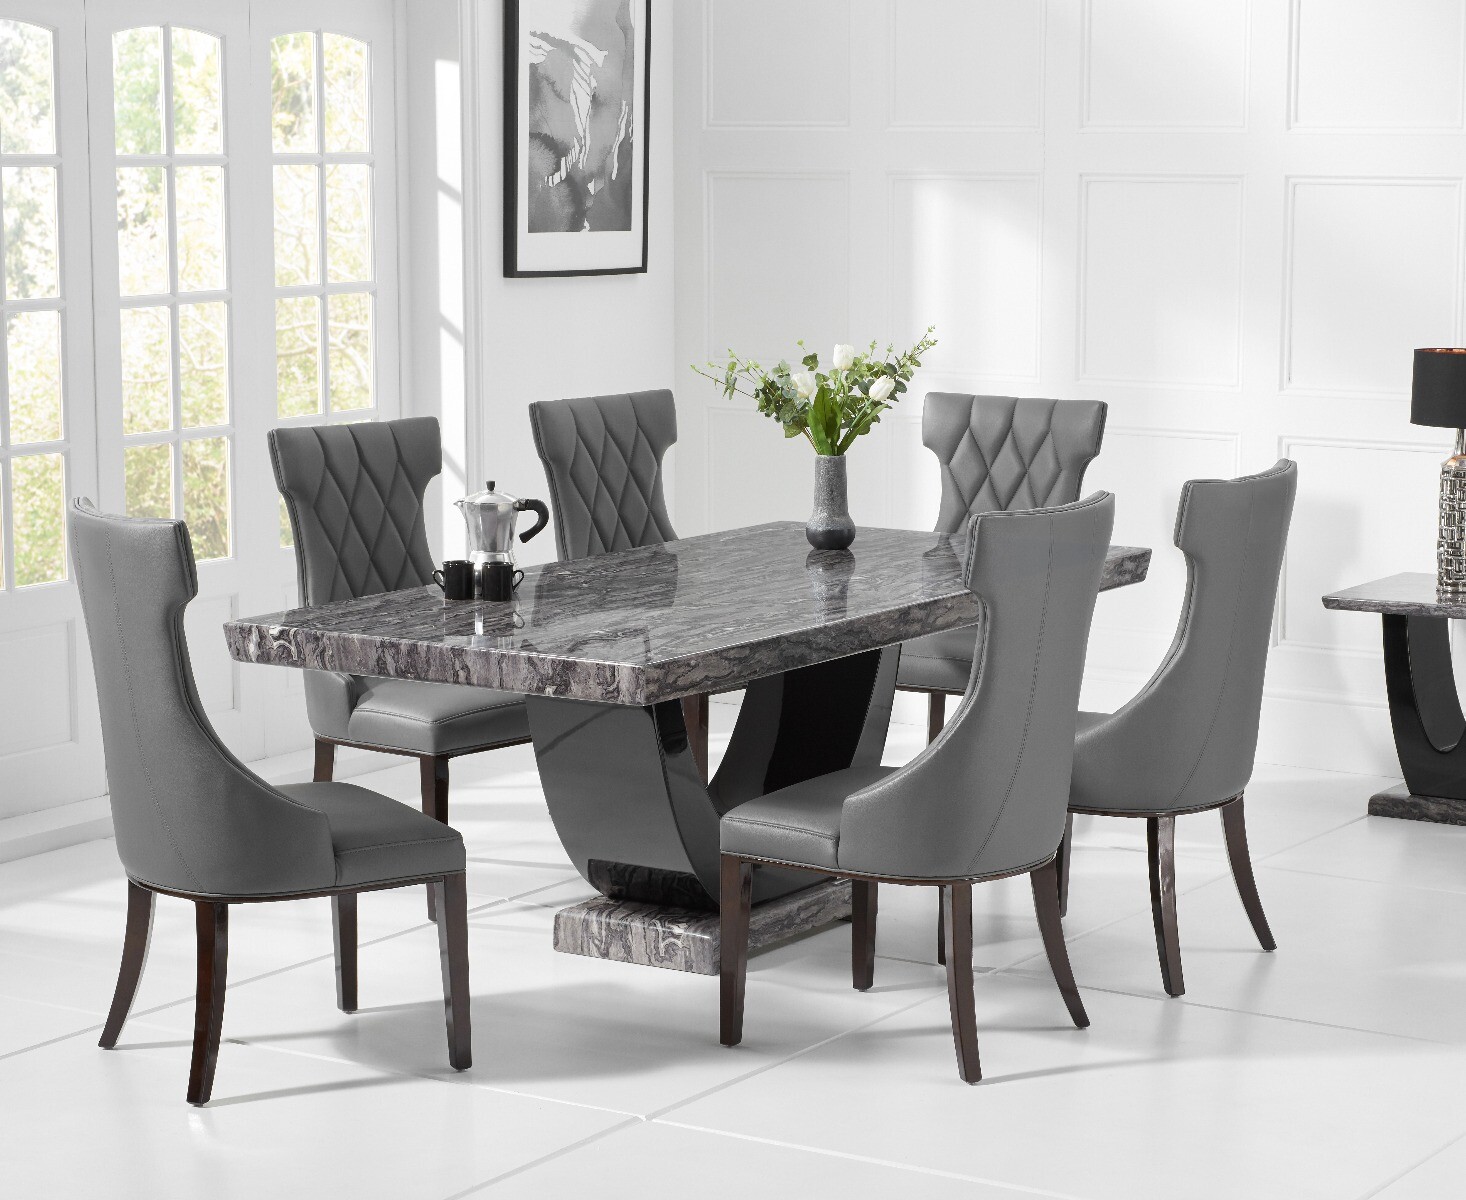 Photo 1 of Raphael 170cm dark grey pedestal marble dining table with 4 cream sophia chairs